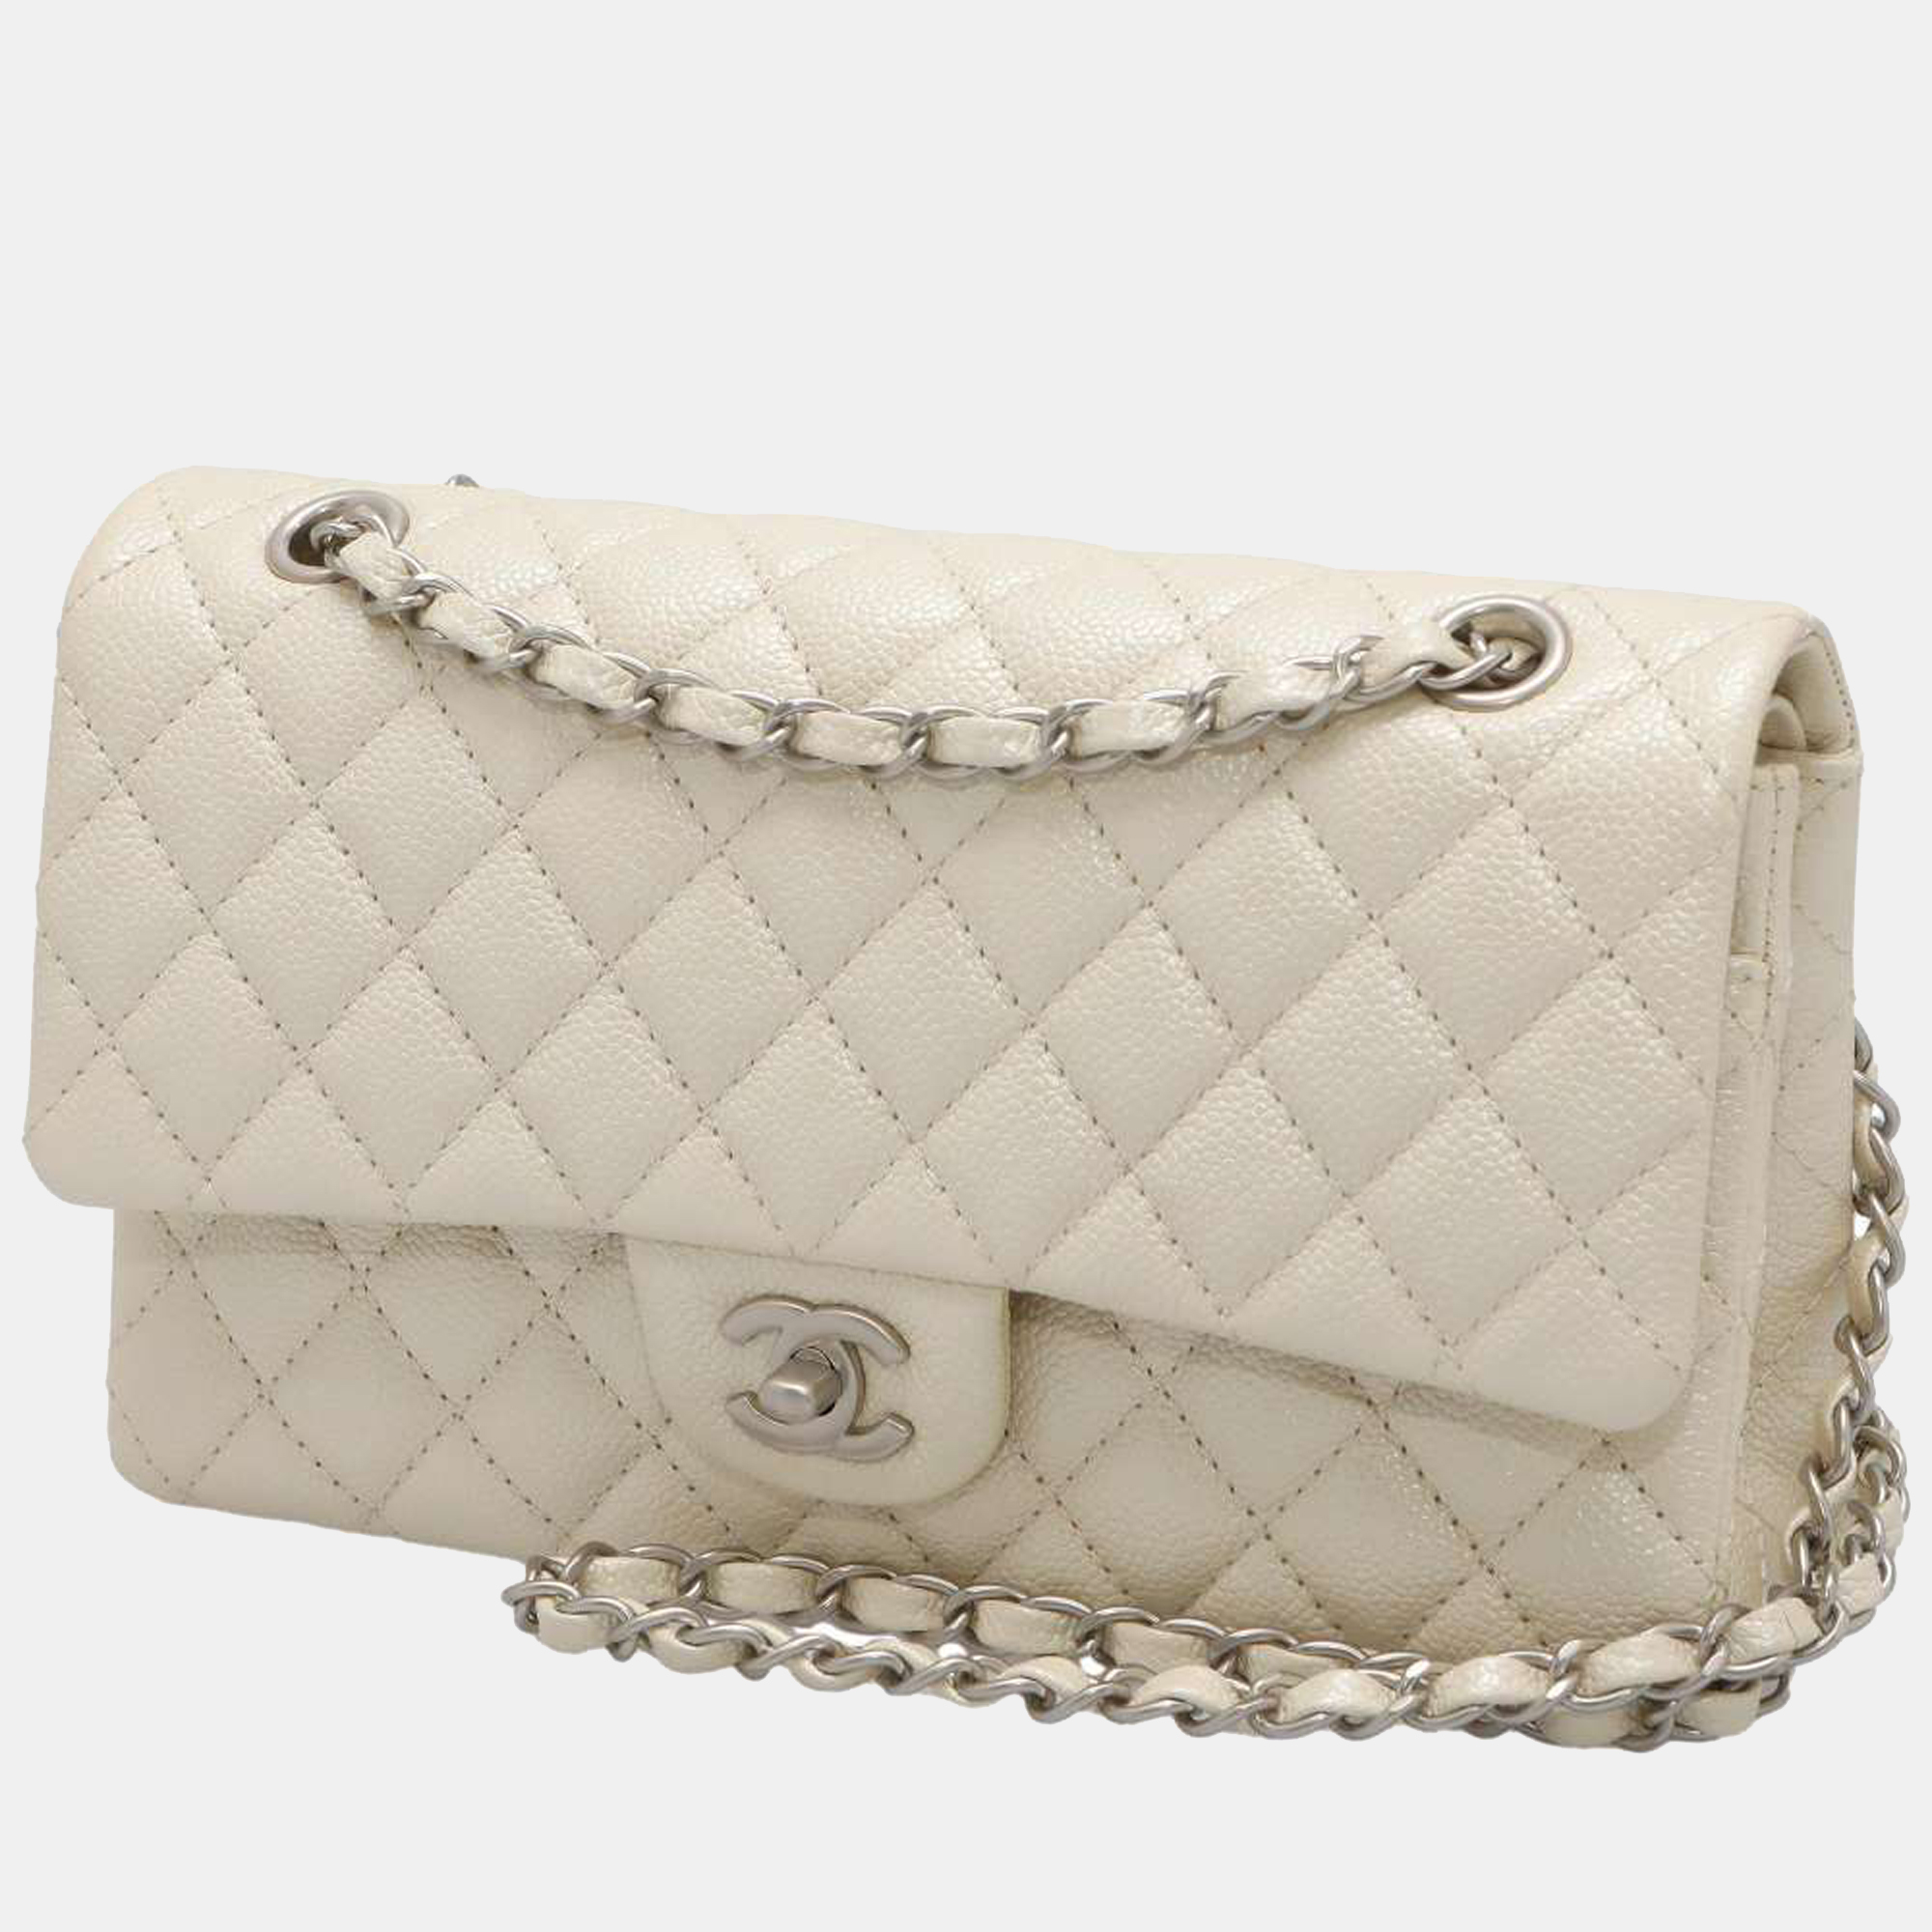 Pre-owned Chanel White Leather Classic Medium Double Flap Shoulder Bag